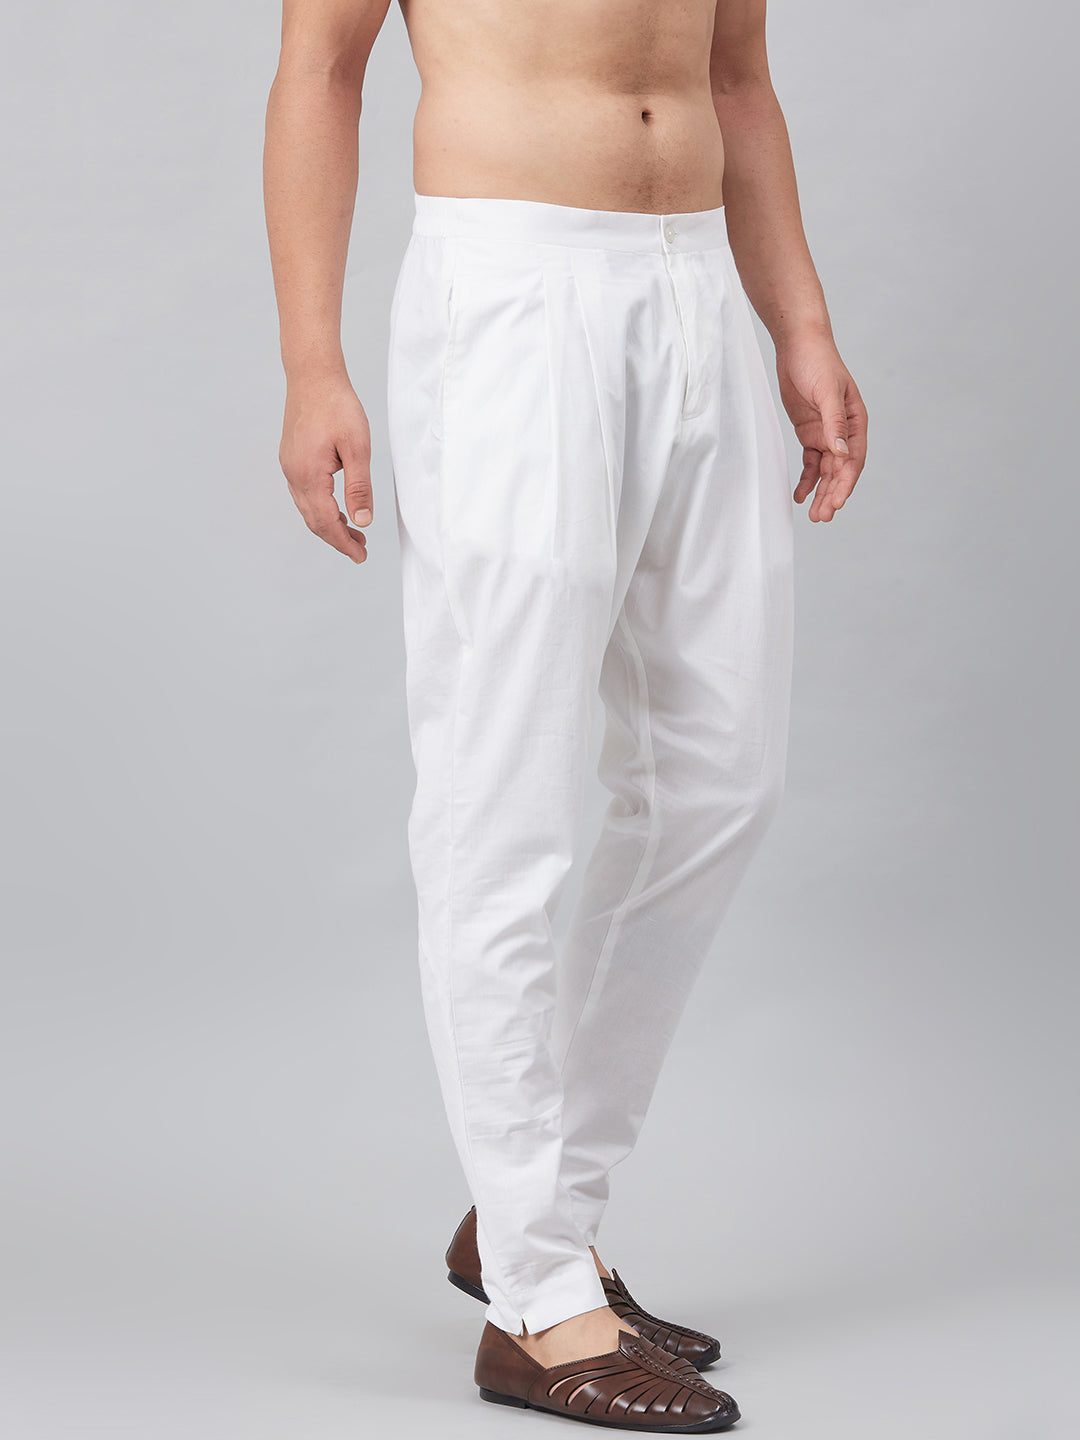 Combo Pack of 2: White Solid Cotton Pyjama and Cotton Trouser